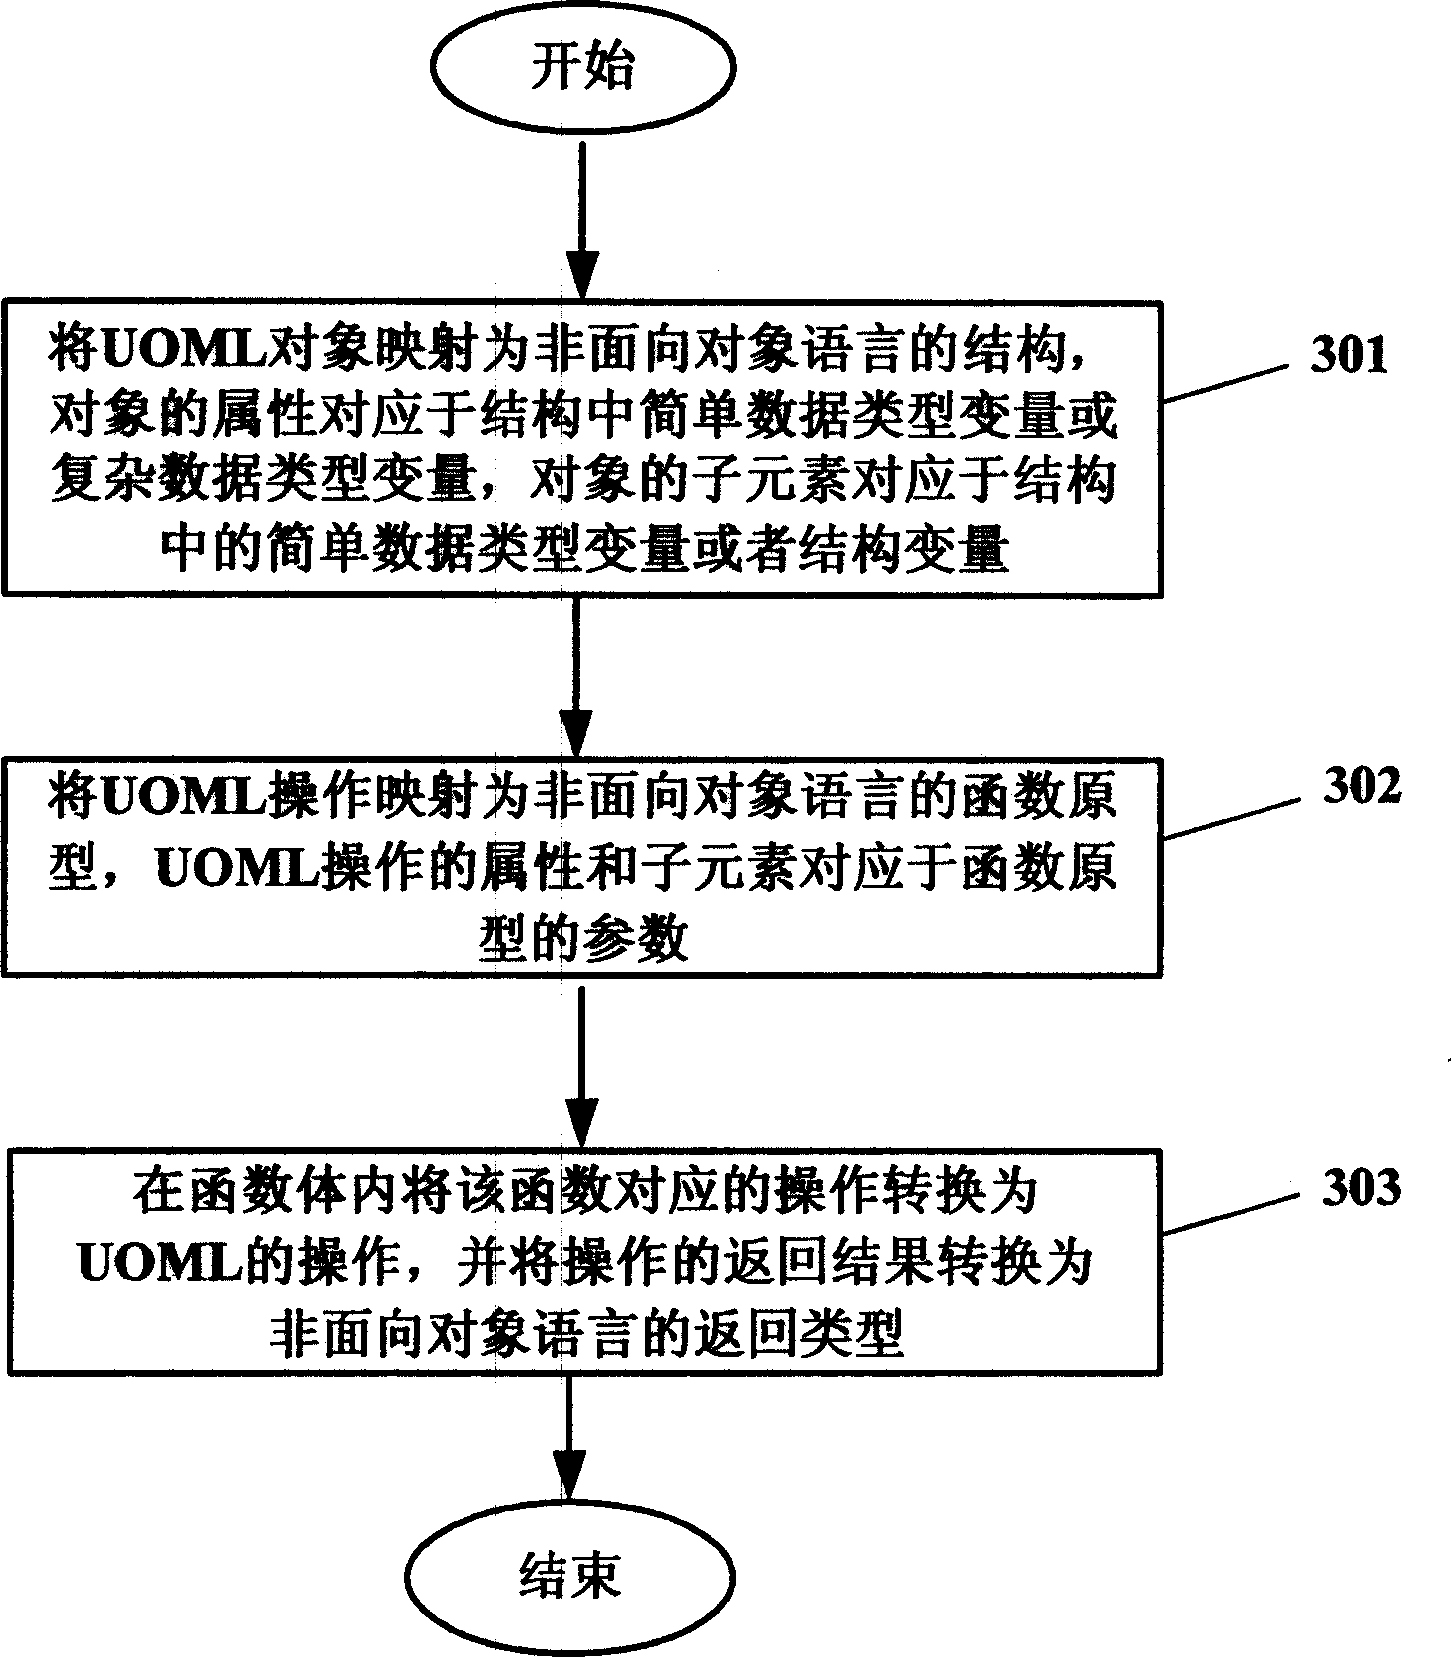 Method for packaging UOML into application program interface